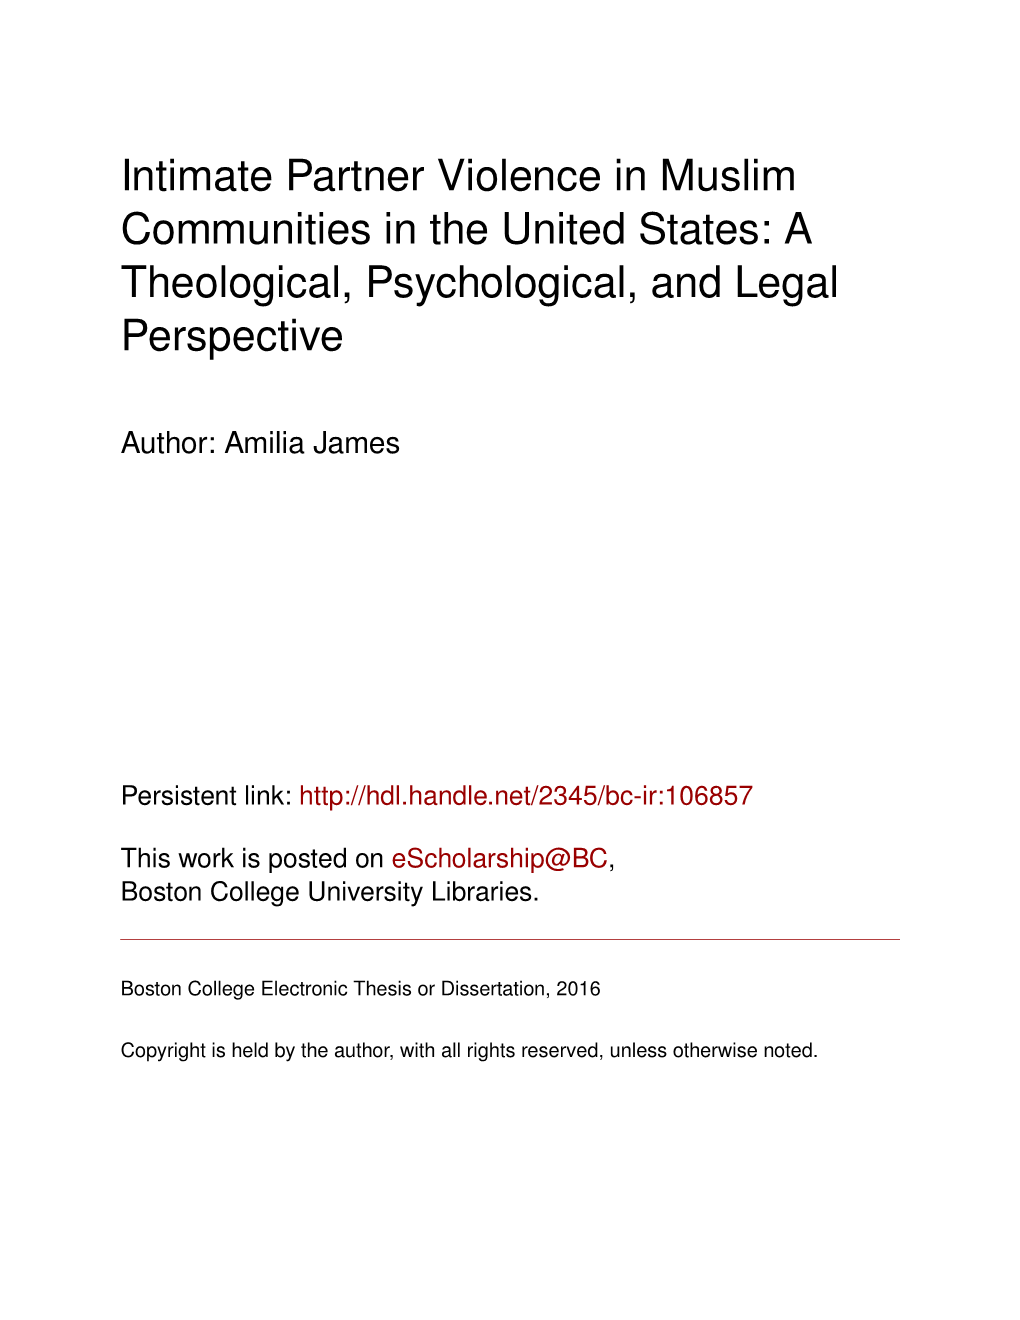 Intimate Partner Violence in Muslim Communities in the United States: a Theological, Psychological, and Legal Perspective